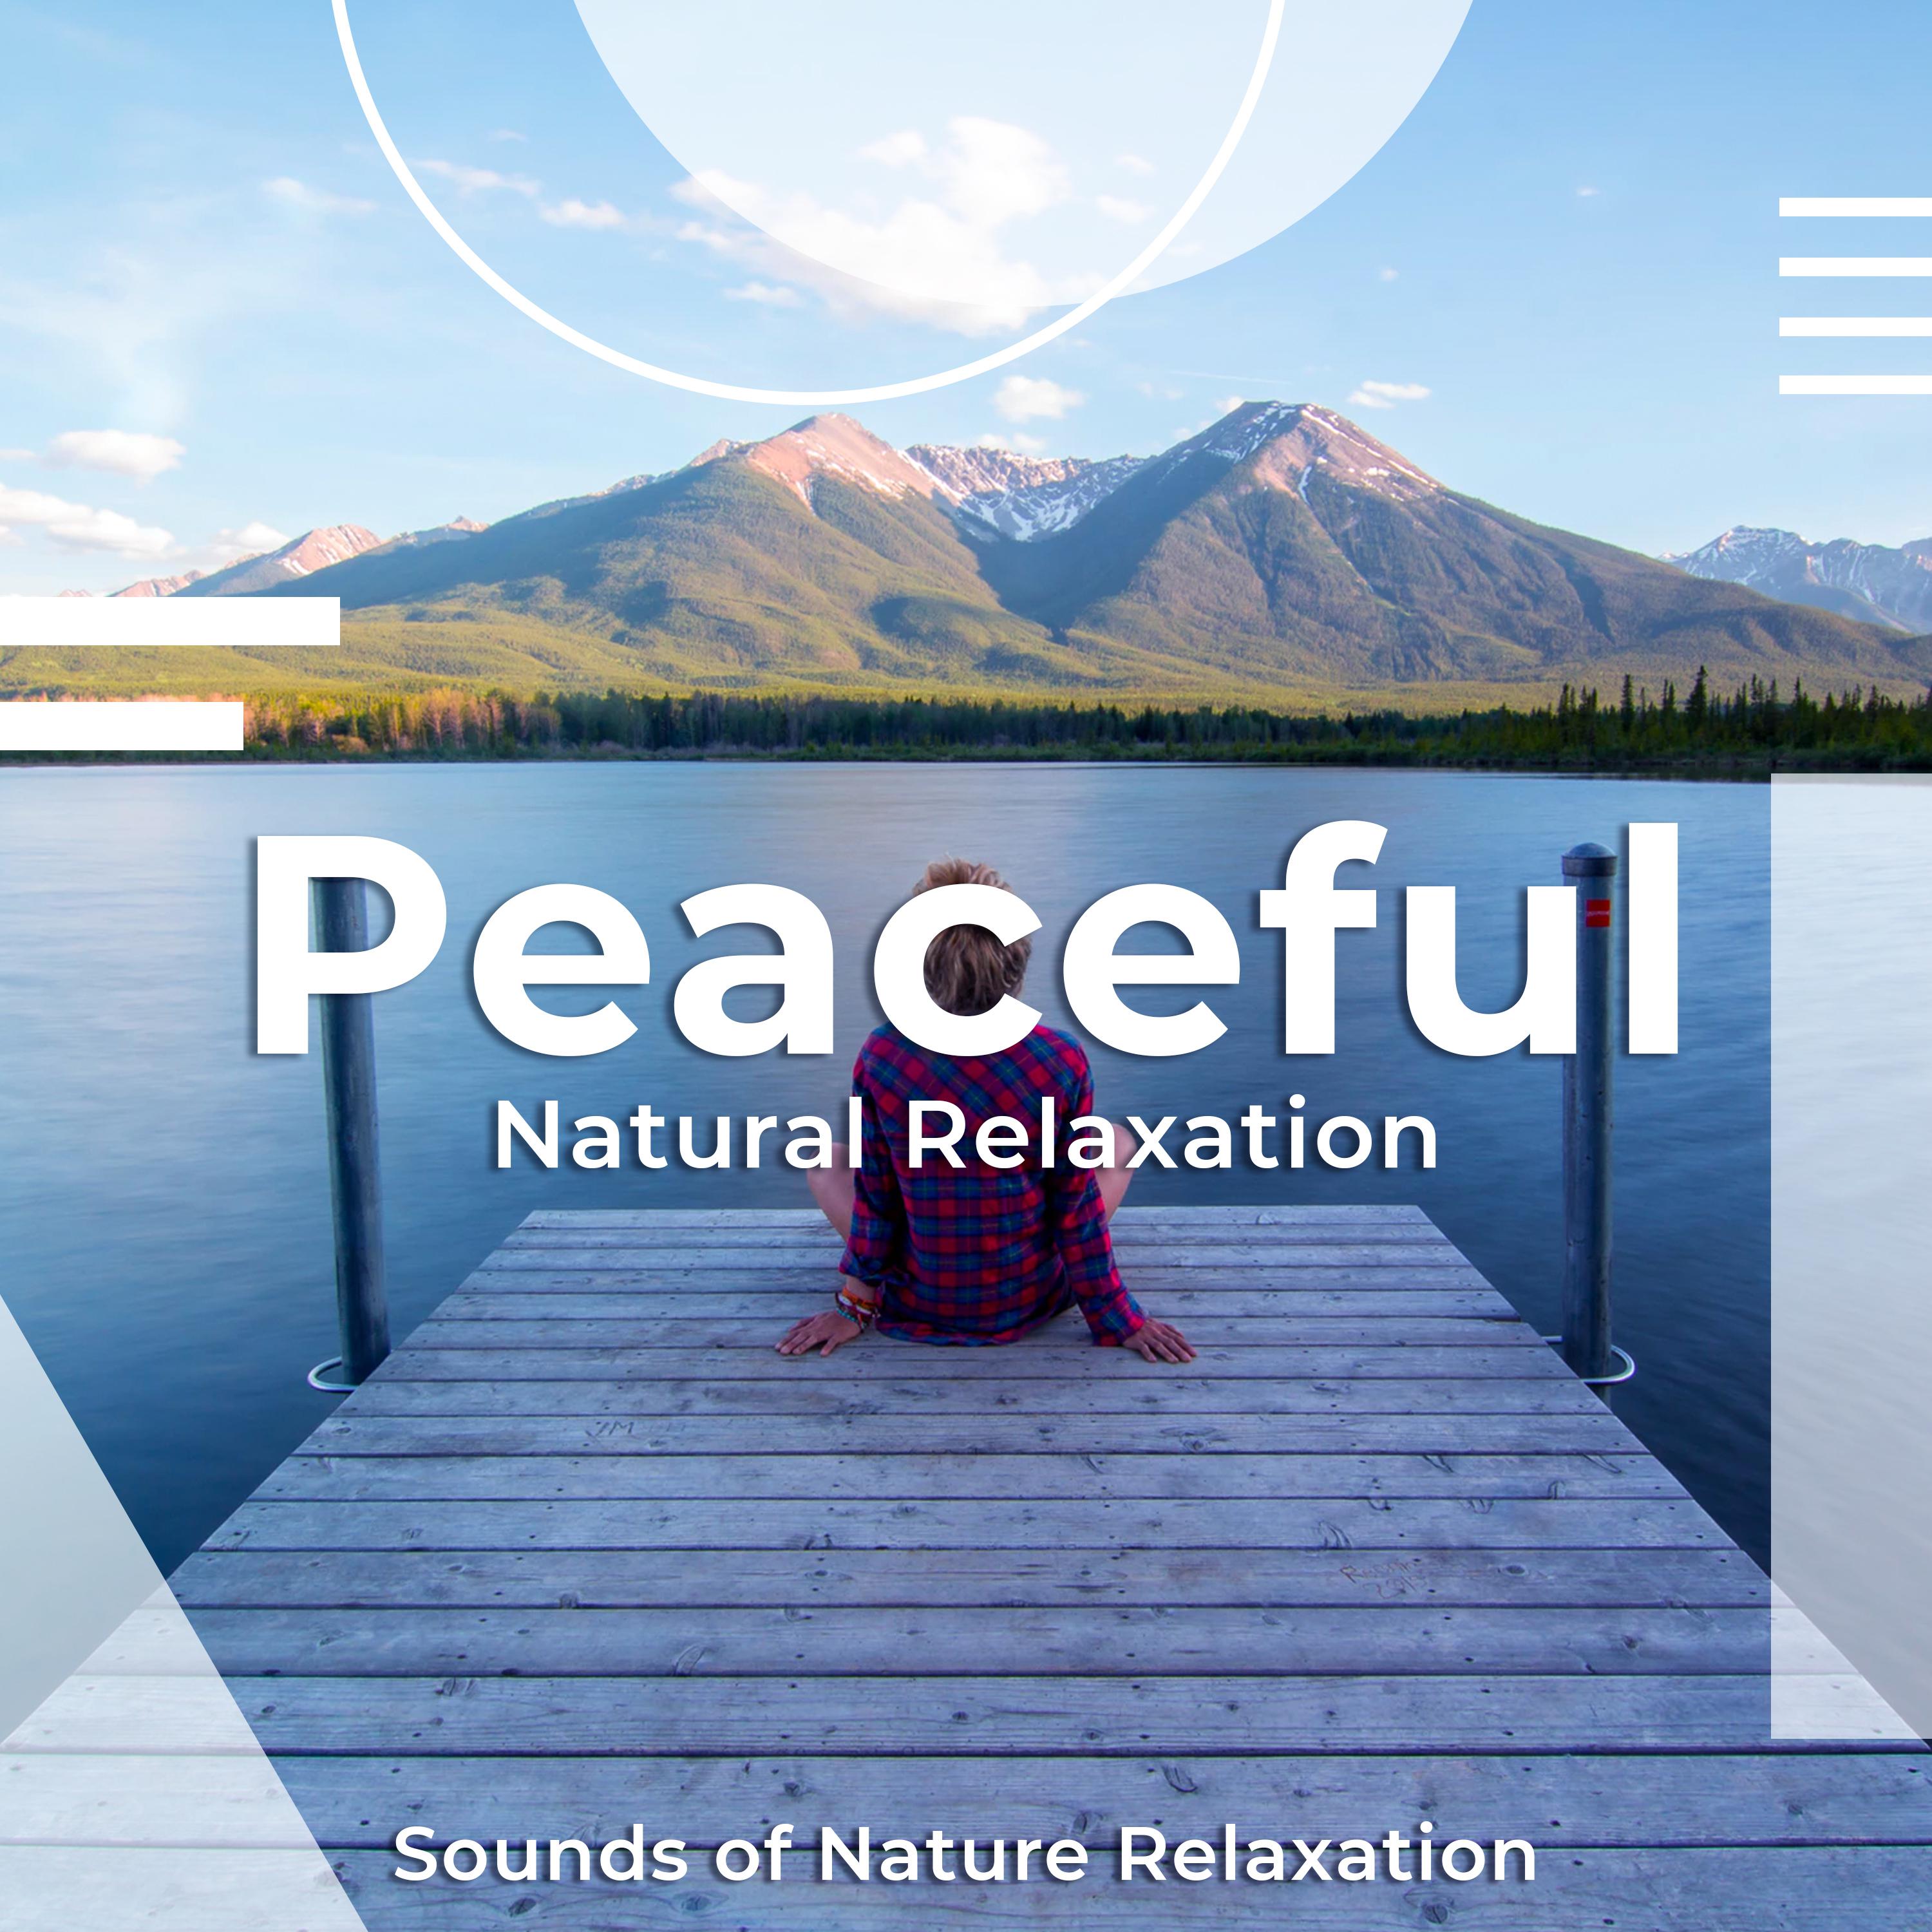 Peaceful Natural Relaxation